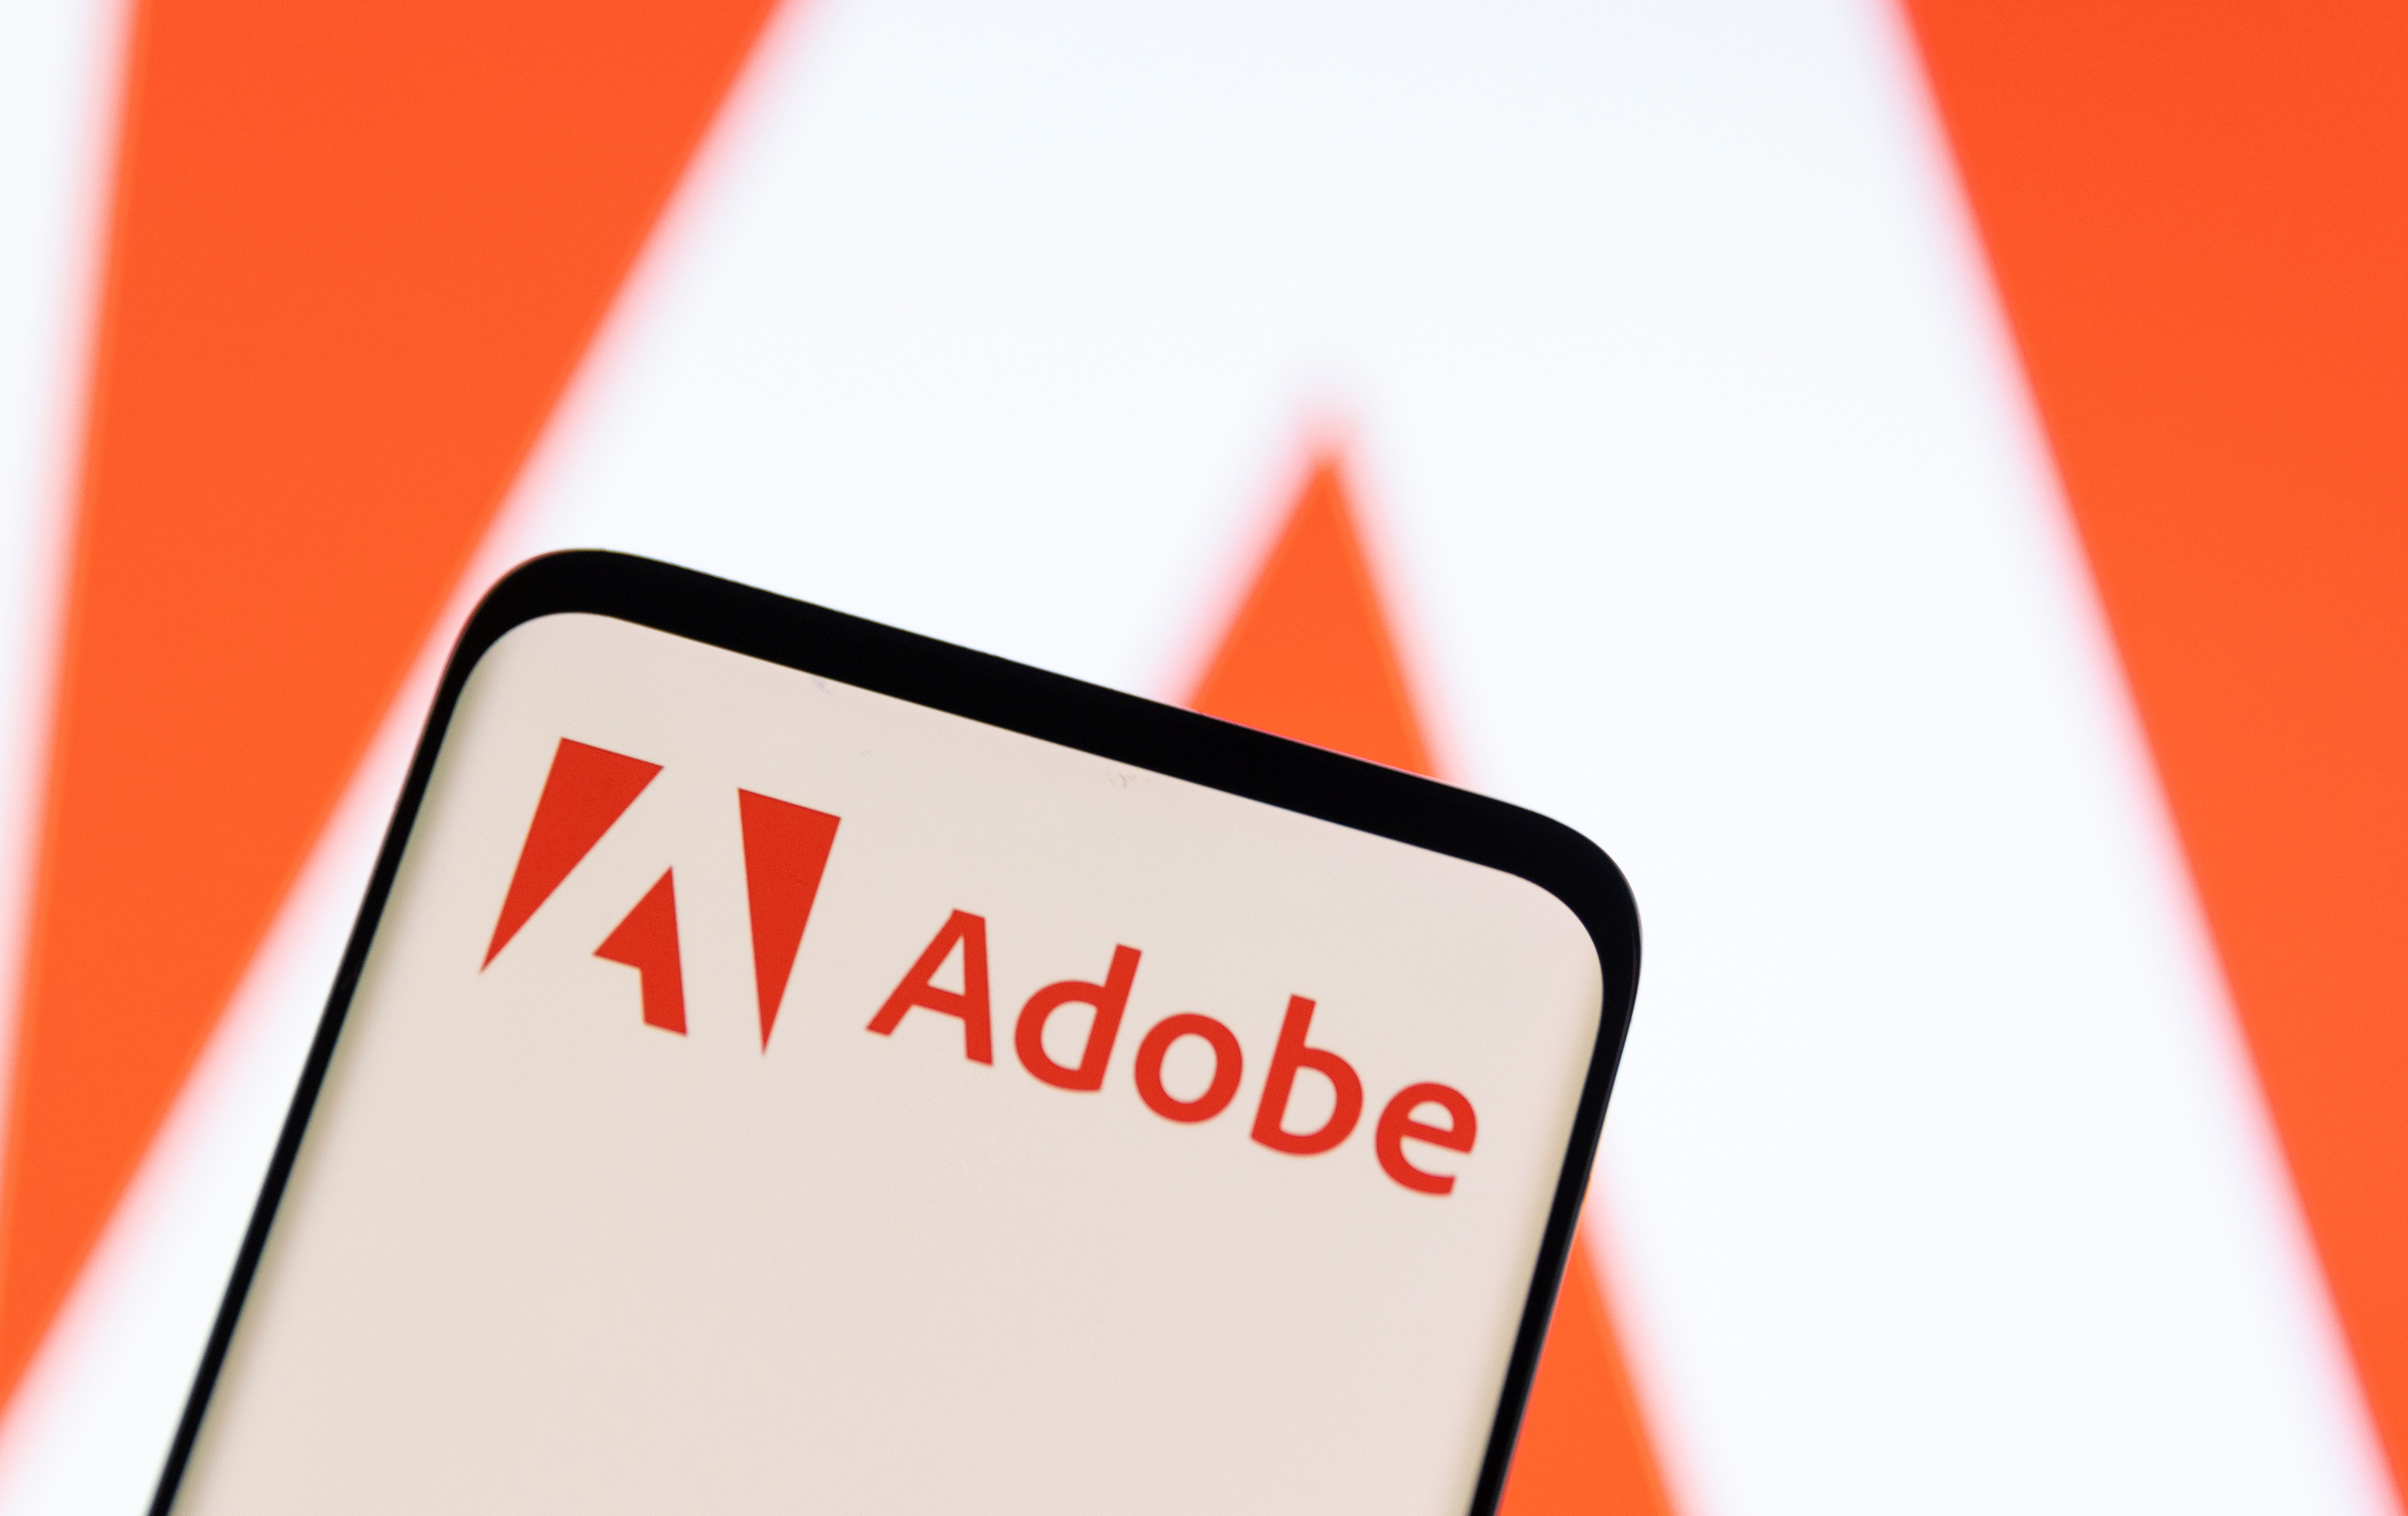 The image shows the Adobe logo